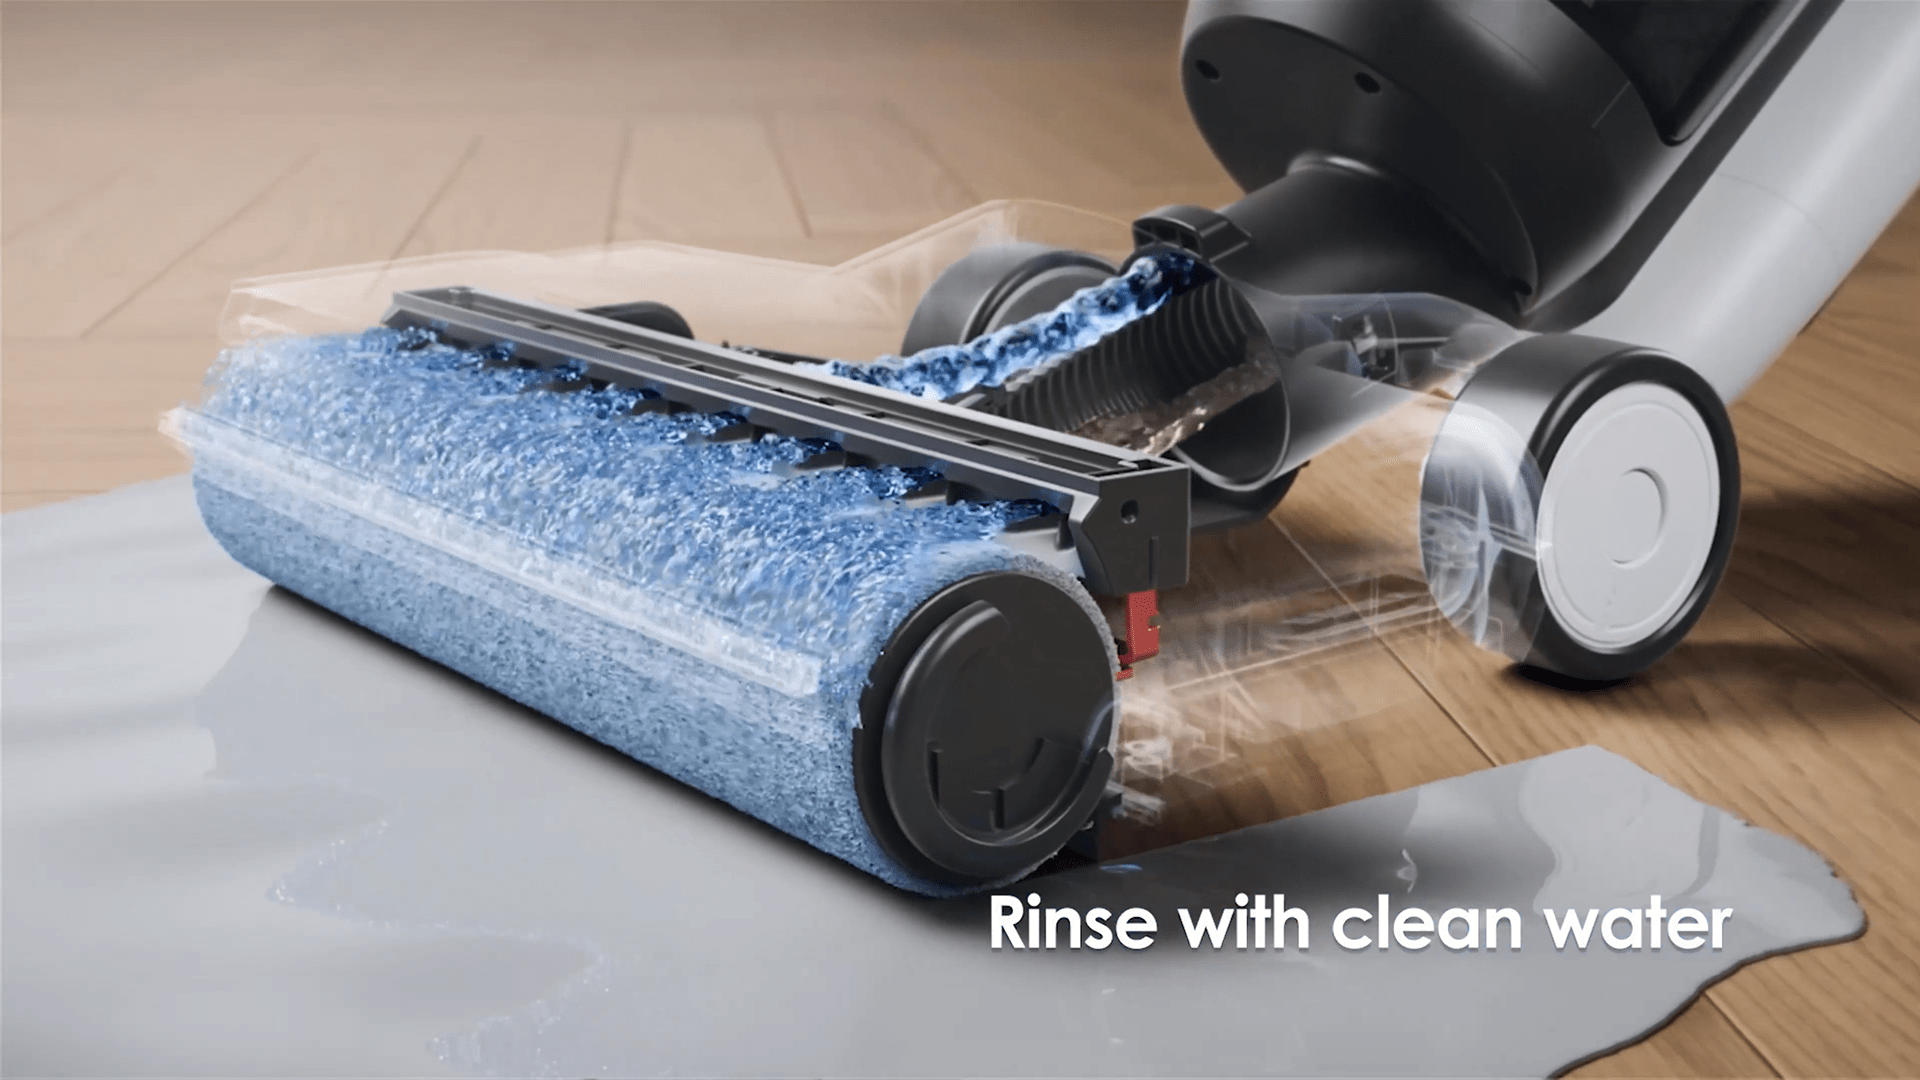 NEW] Flagship Tineco FLOOR ONE S6 Smart Wet & Dry Cordless Vacuum Cleaner  Mop Floor Washer, Dual-Edged Cleaning